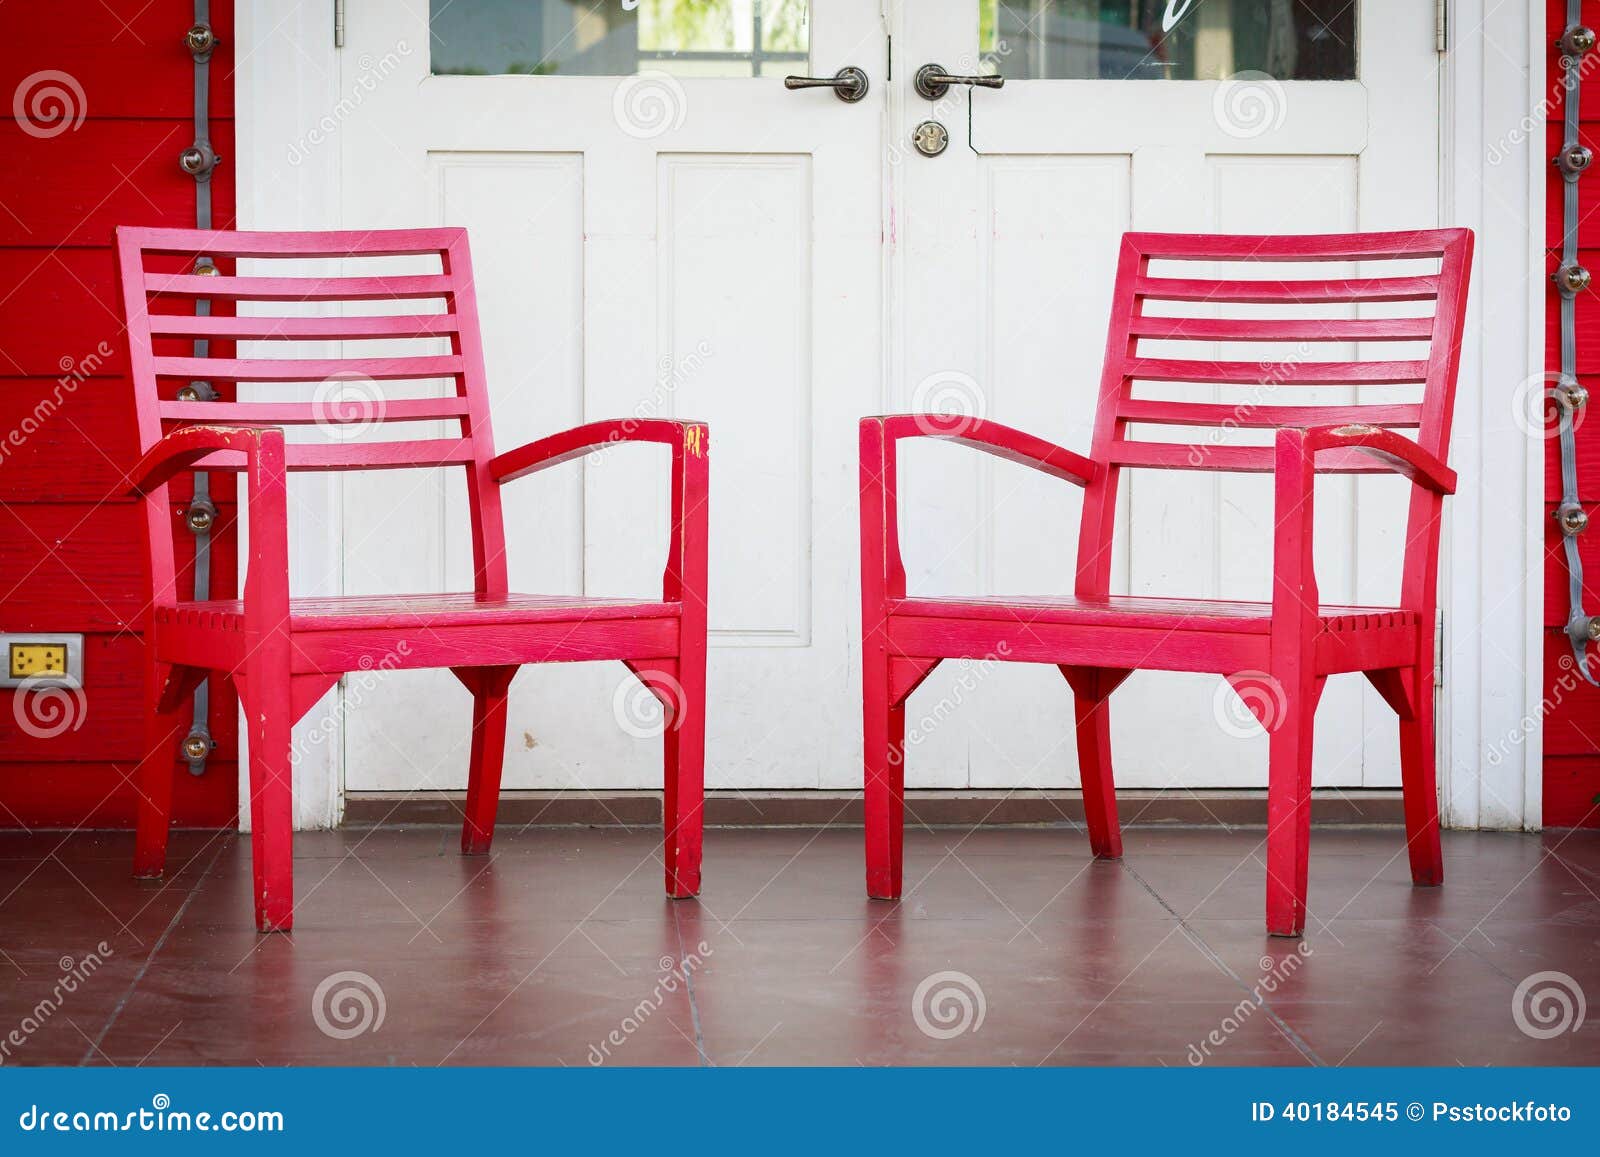 Red wooden Chair vintage style in front of white door